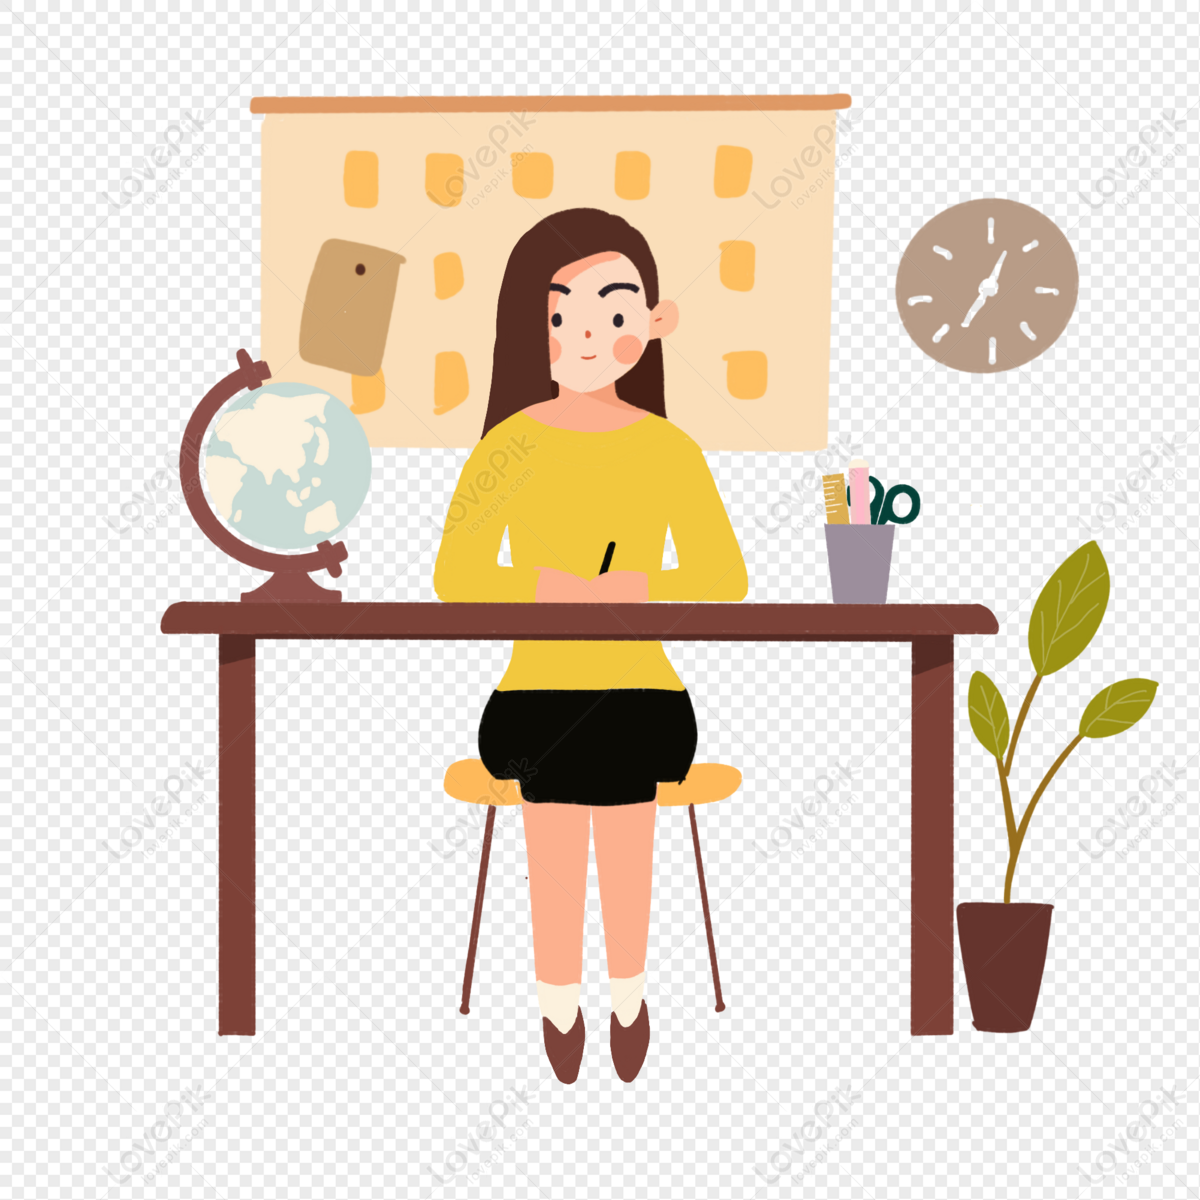 Teacher who corrects the assignment, knowledge gap, and homework, desk png image free download